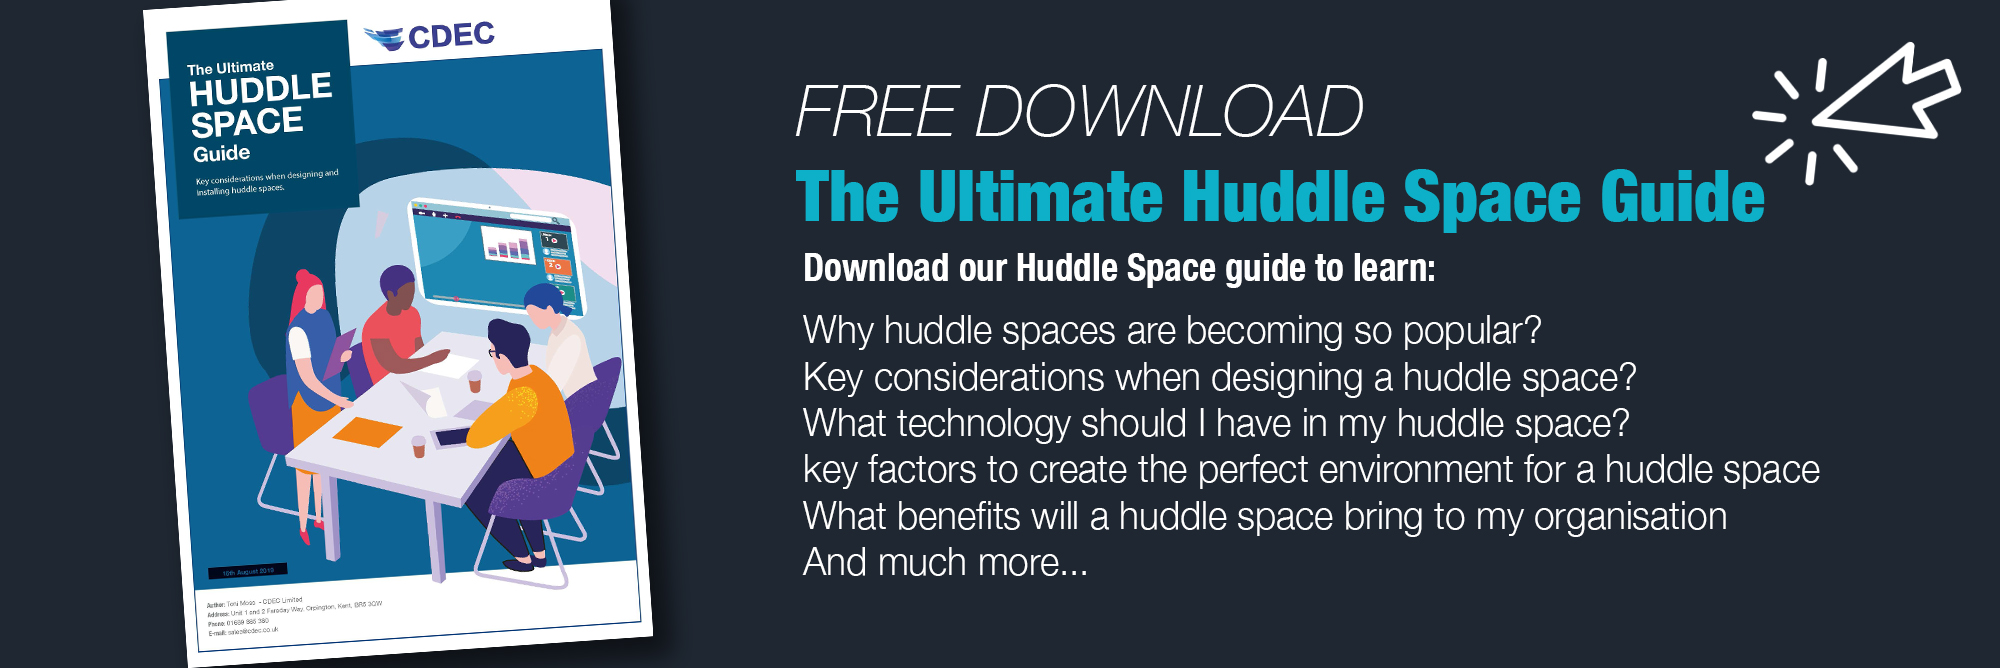 Download the ultimate huddle space guide